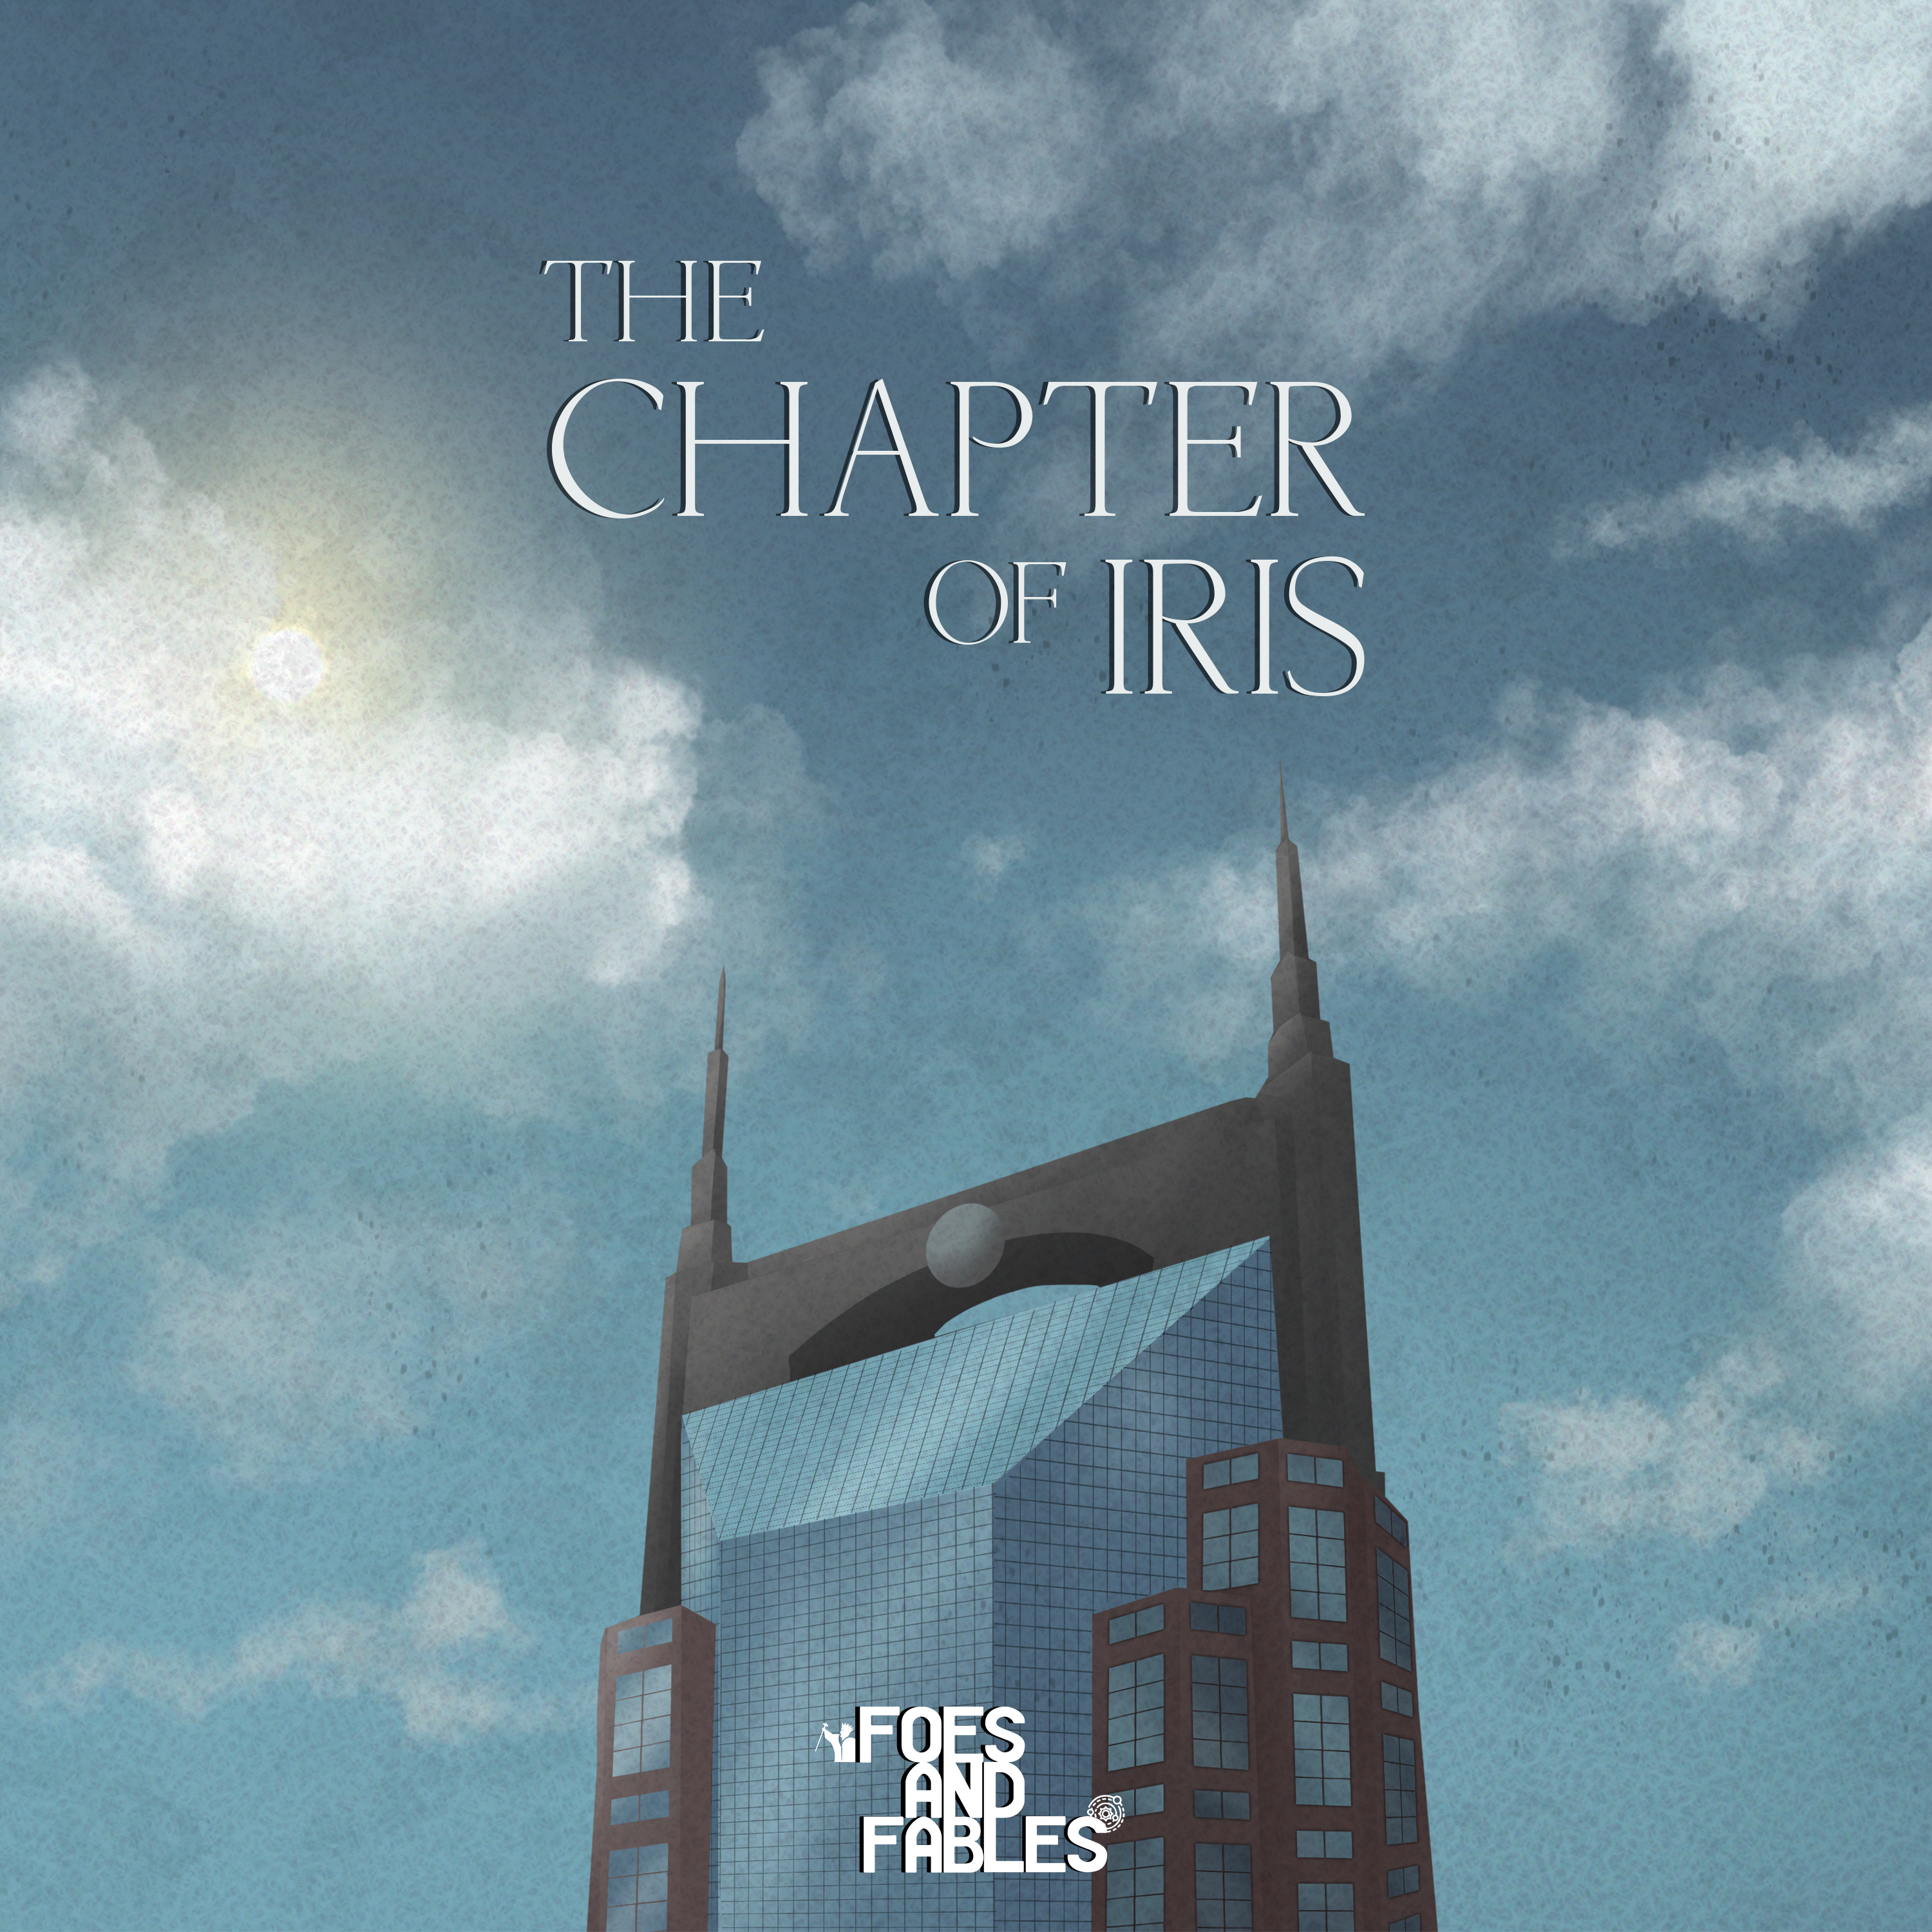 20. Flames | The Chapter of Iris